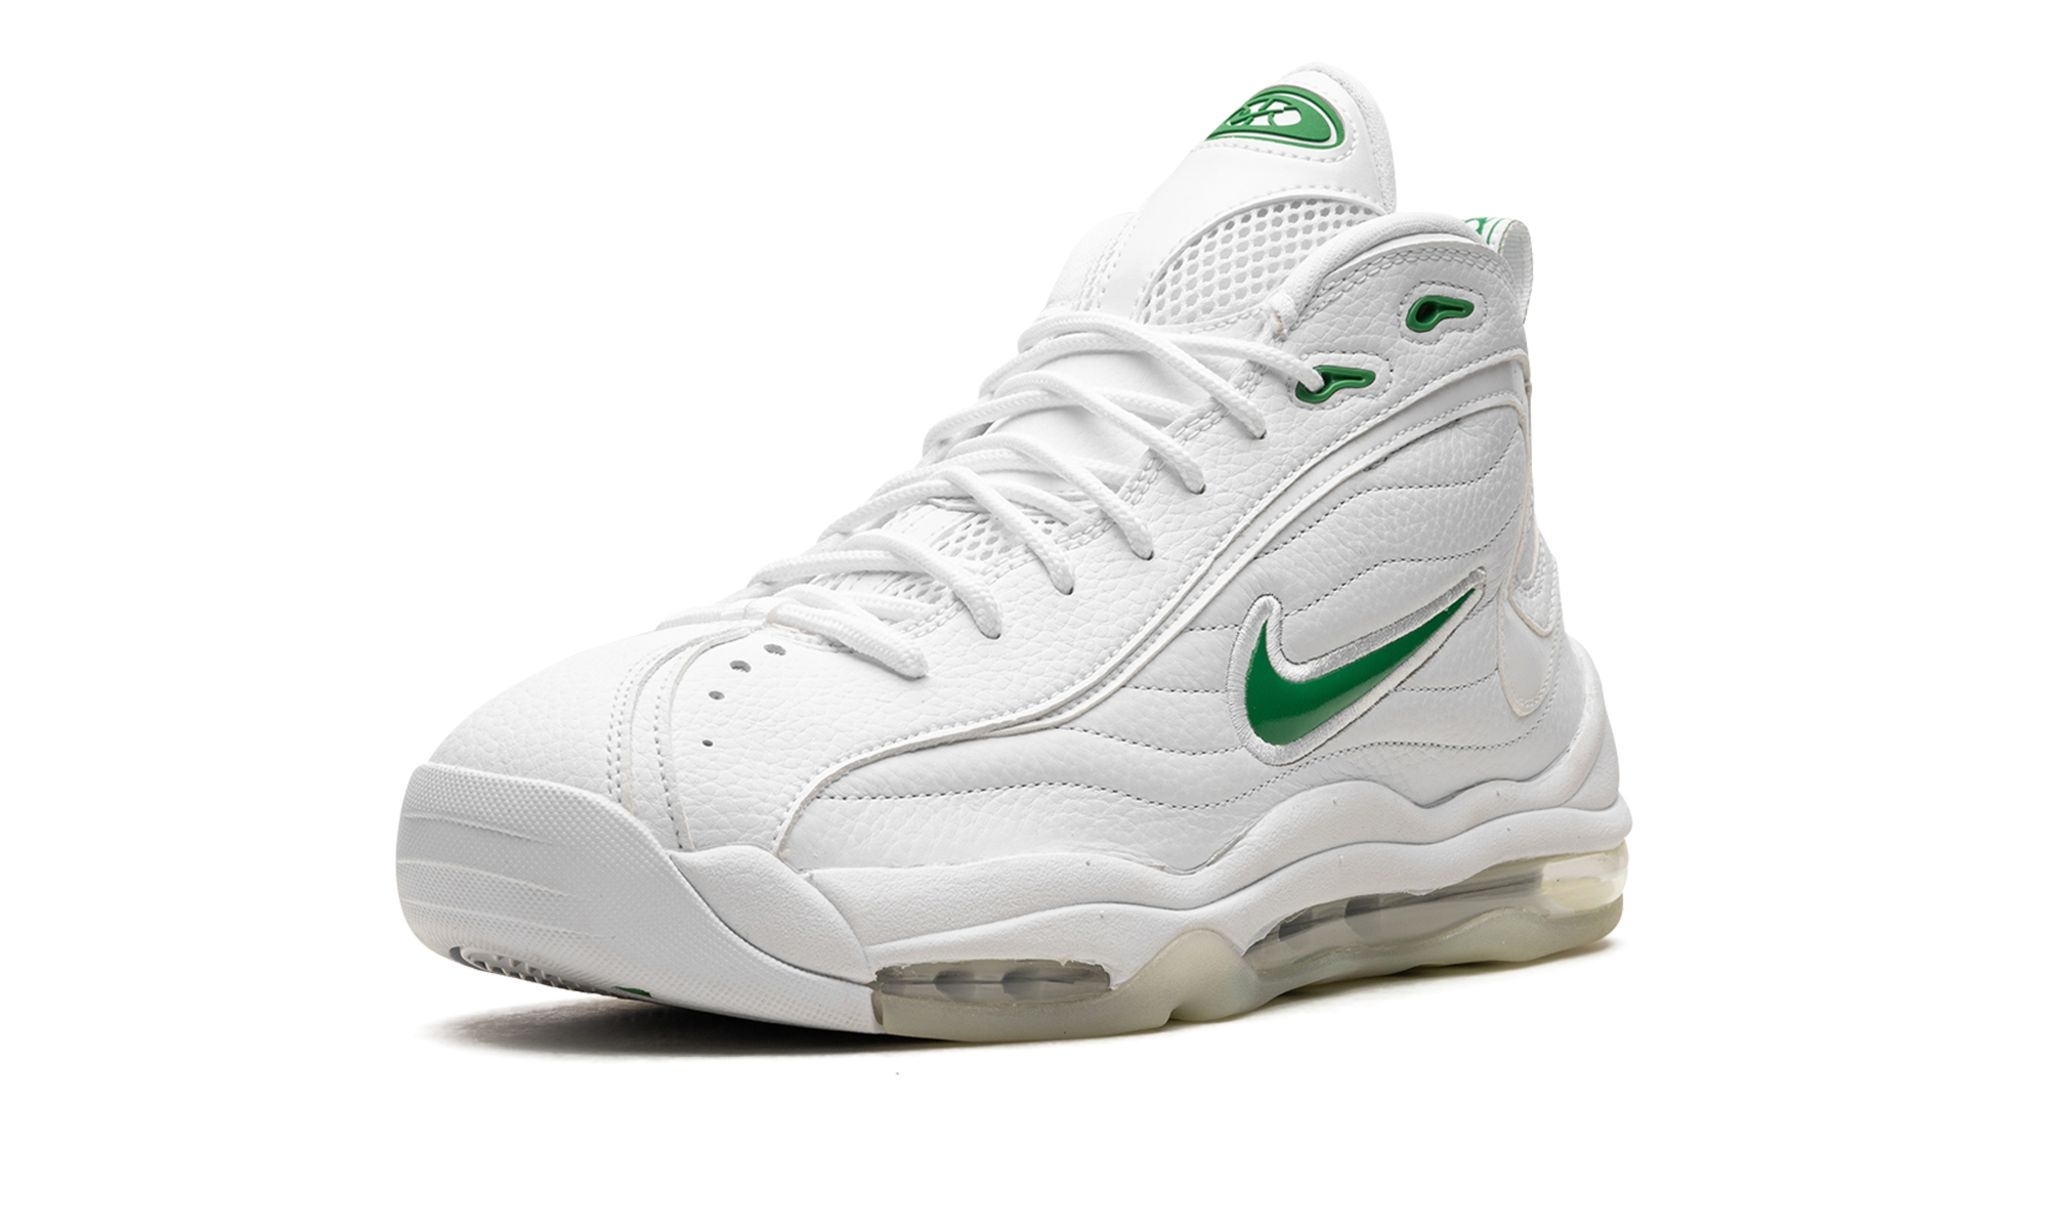 Air Total Max Uptempo "Classic Green" - 4